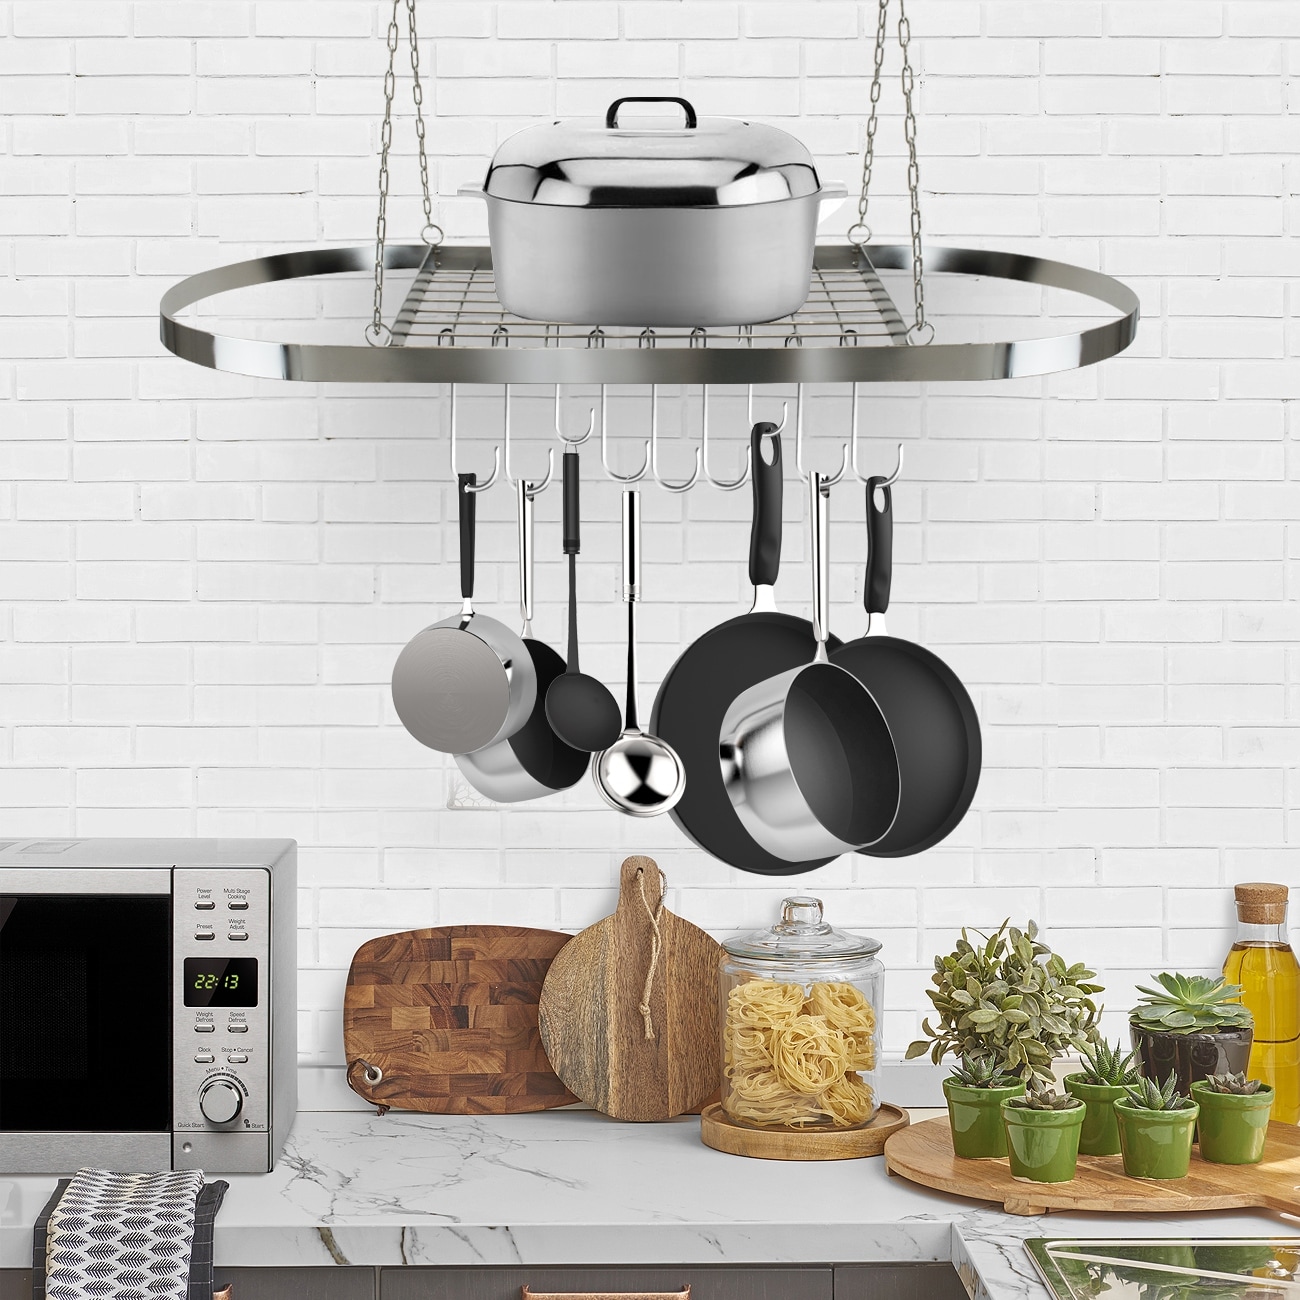 https://ak1.ostkcdn.com/images/products/is/images/direct/4ee1d0c80d5bf99ba4236643c9b507946bb82028/Ceiling-mounted-Pot-Rack-with-Hooks---Chrome.jpg